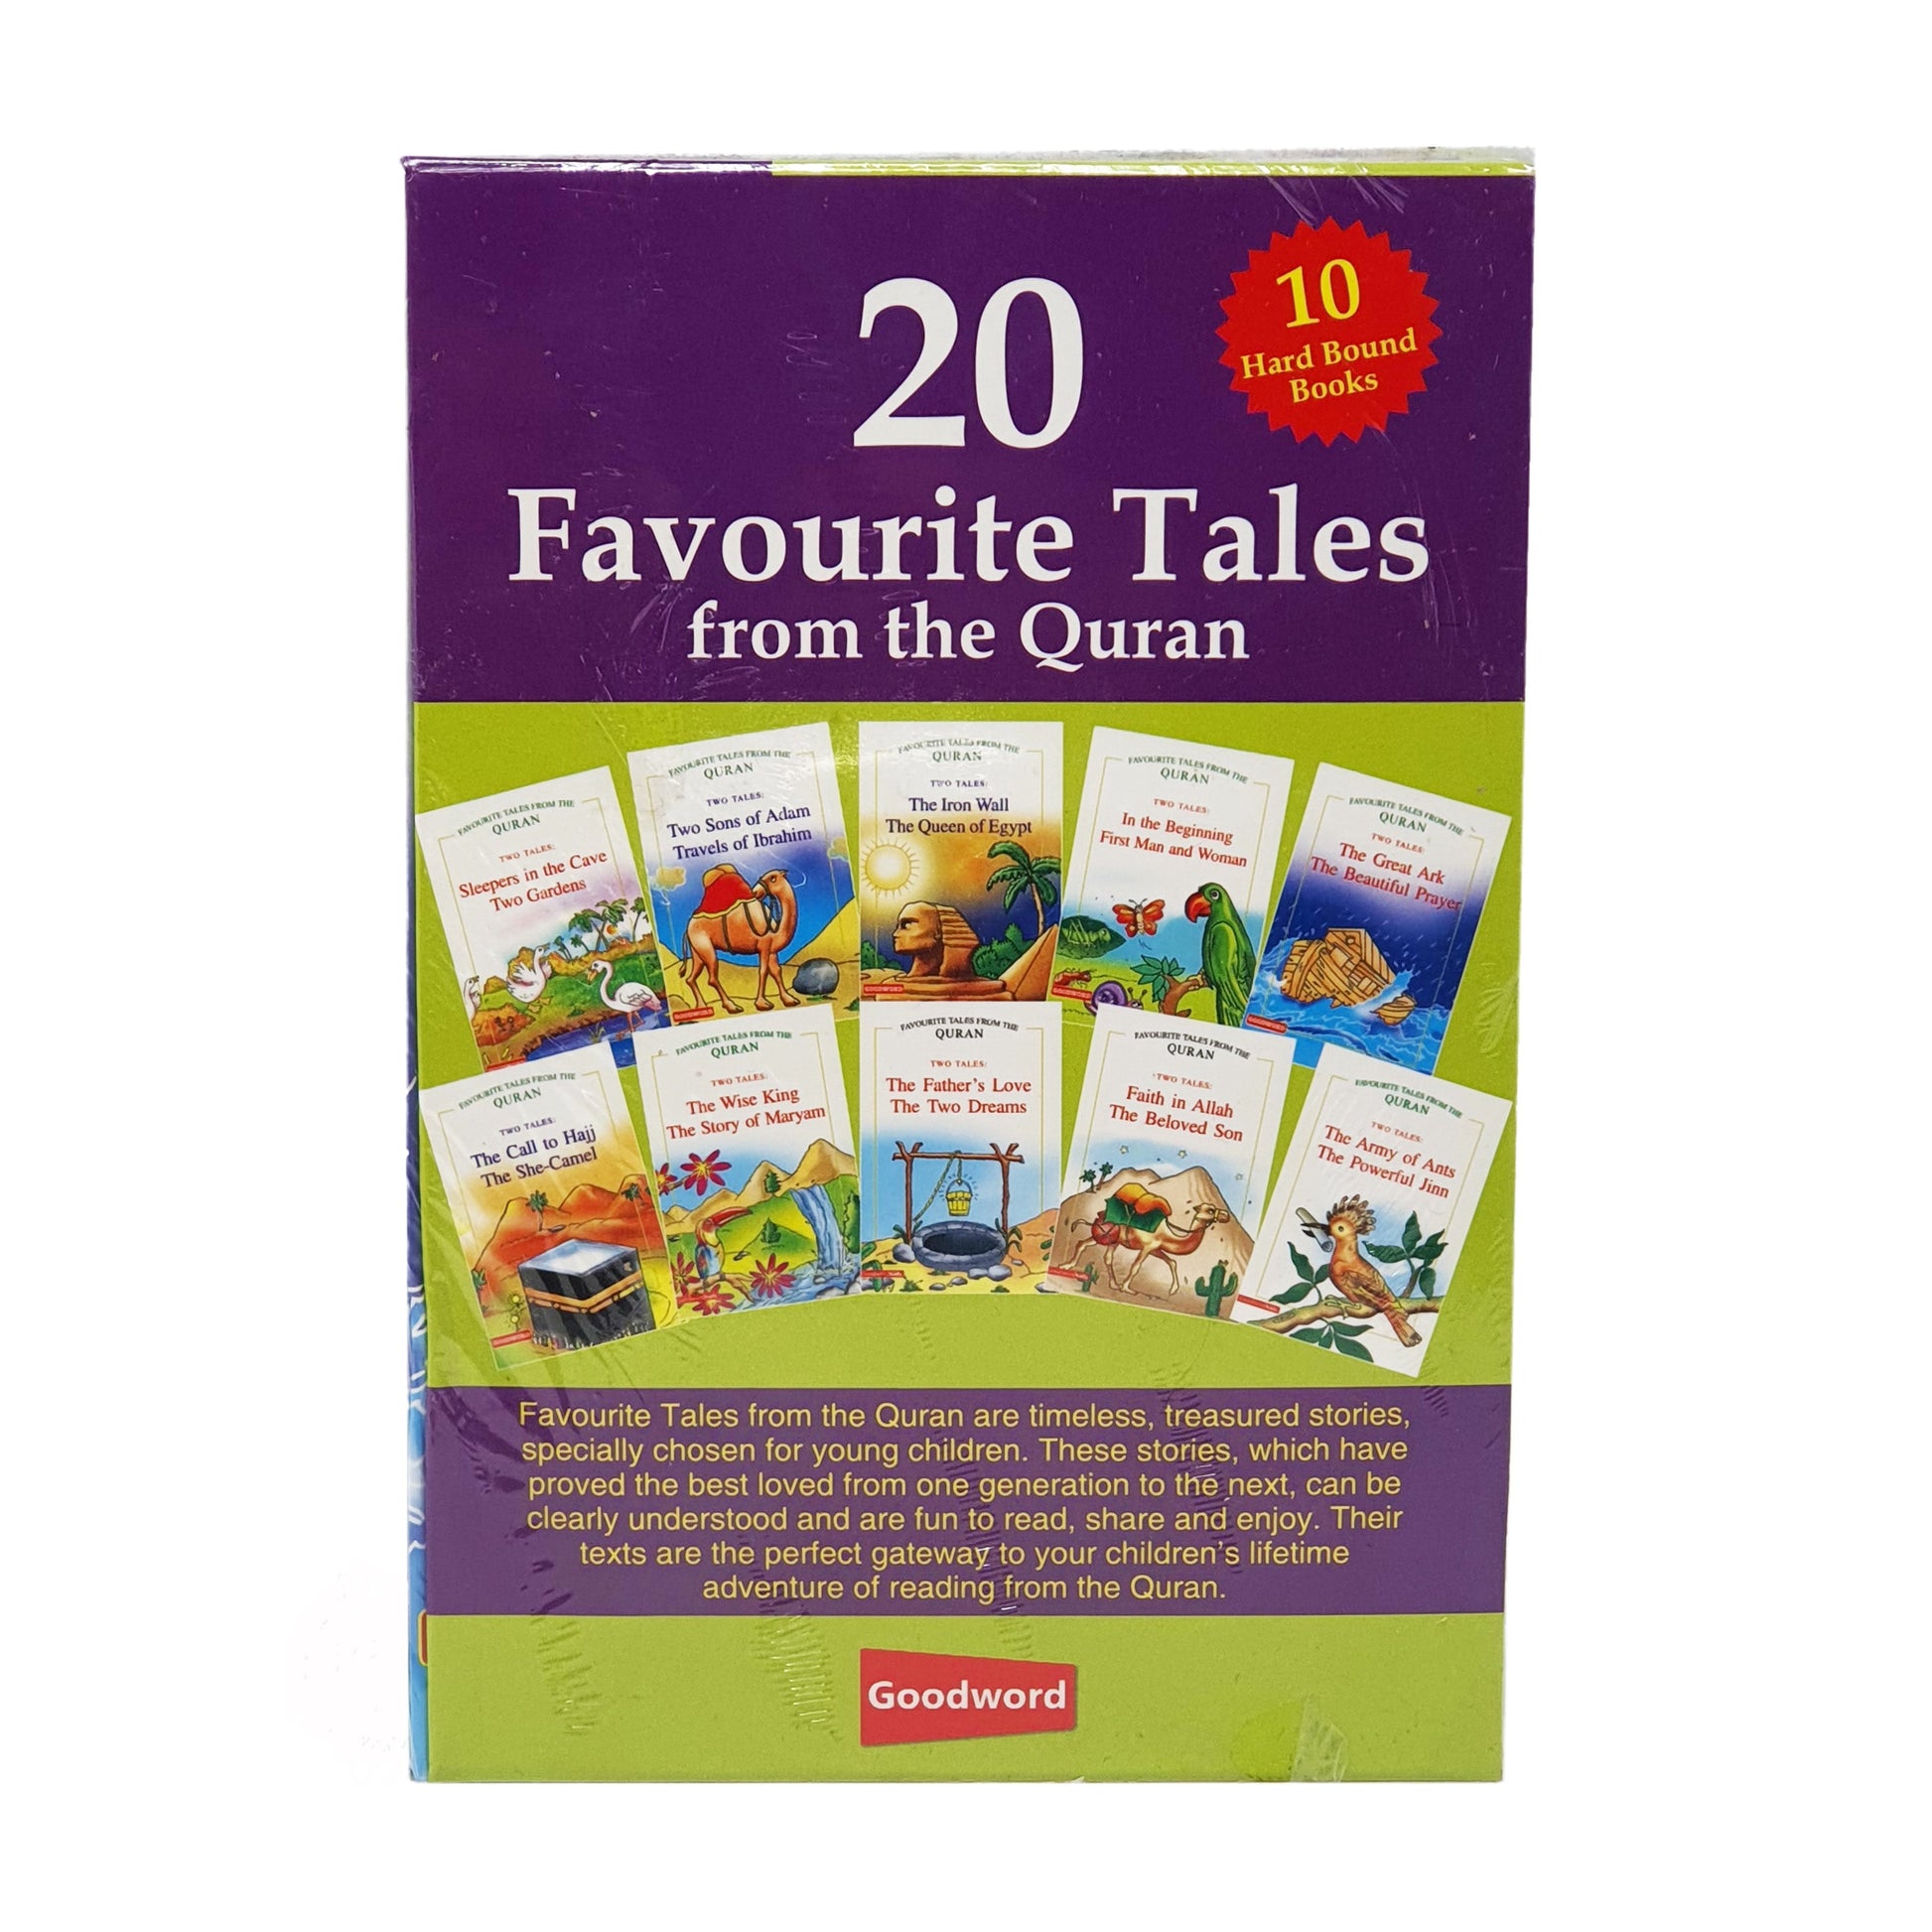 20 Favourite Tales from the Quran